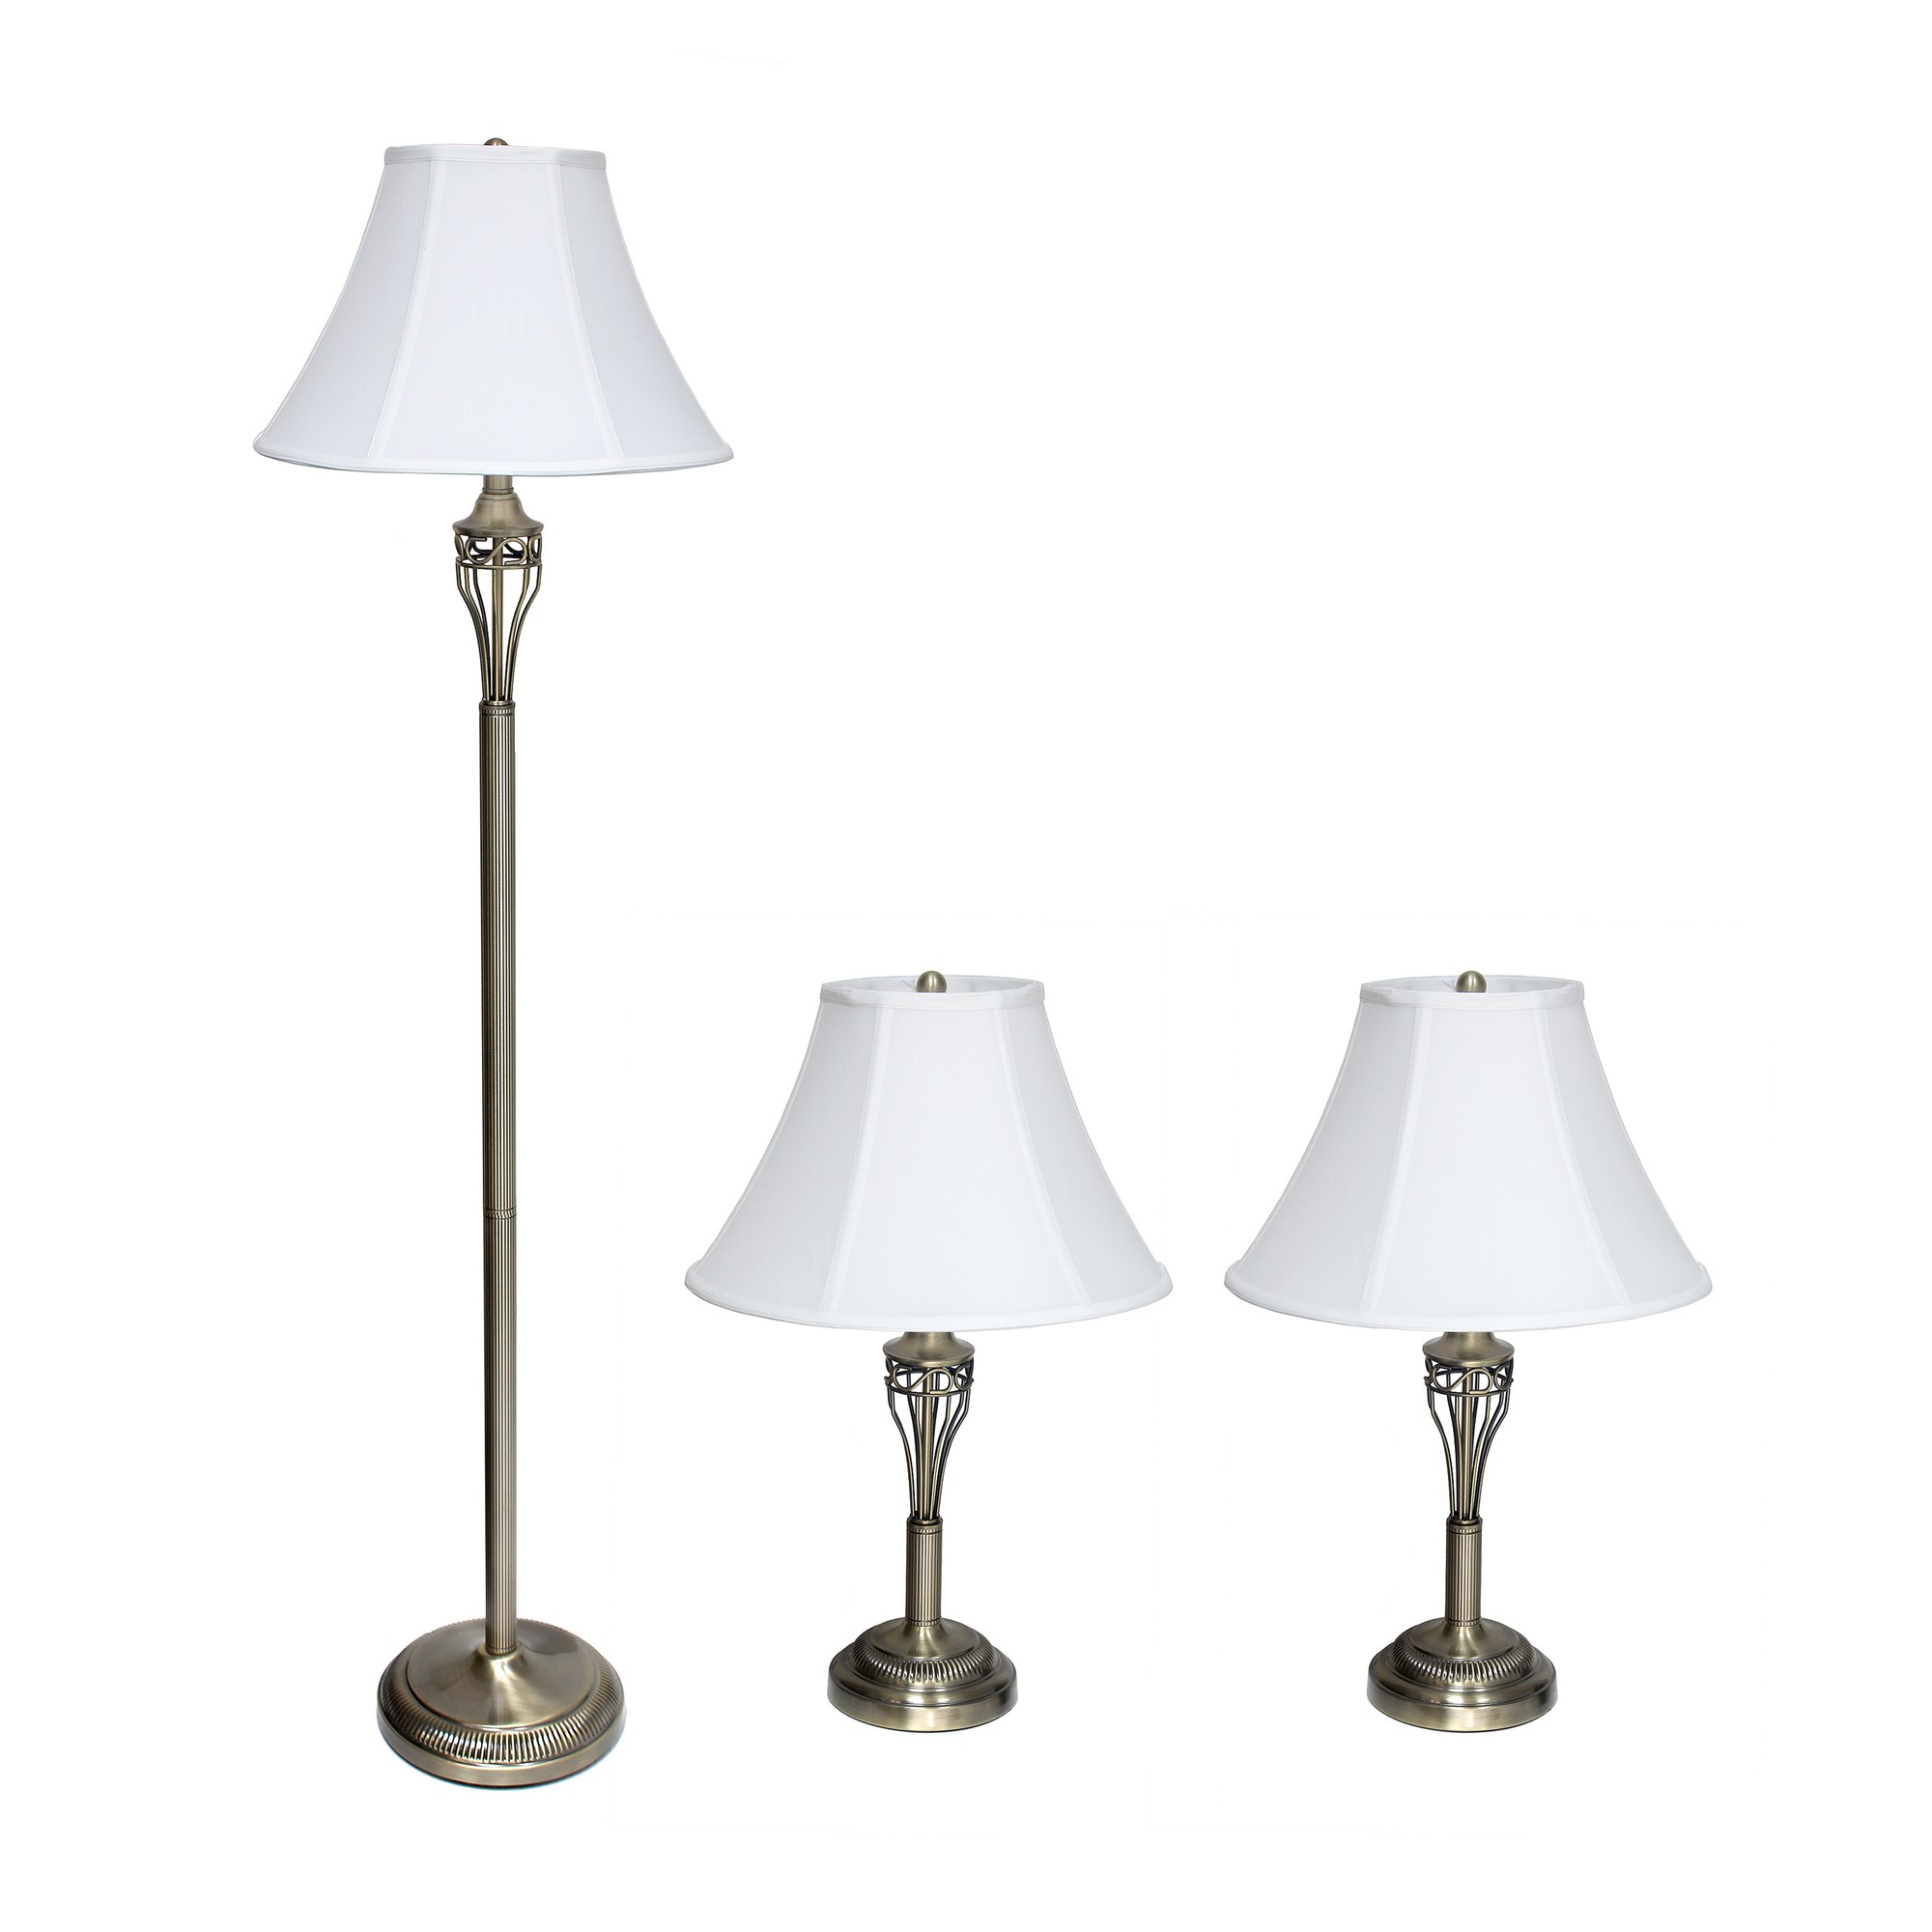 Lalia Home 3 Piece Metal Lamp Set (2 Table Lamps, 1 Floor Lamp) Empire Fabric Shades and Antique Brass Finish